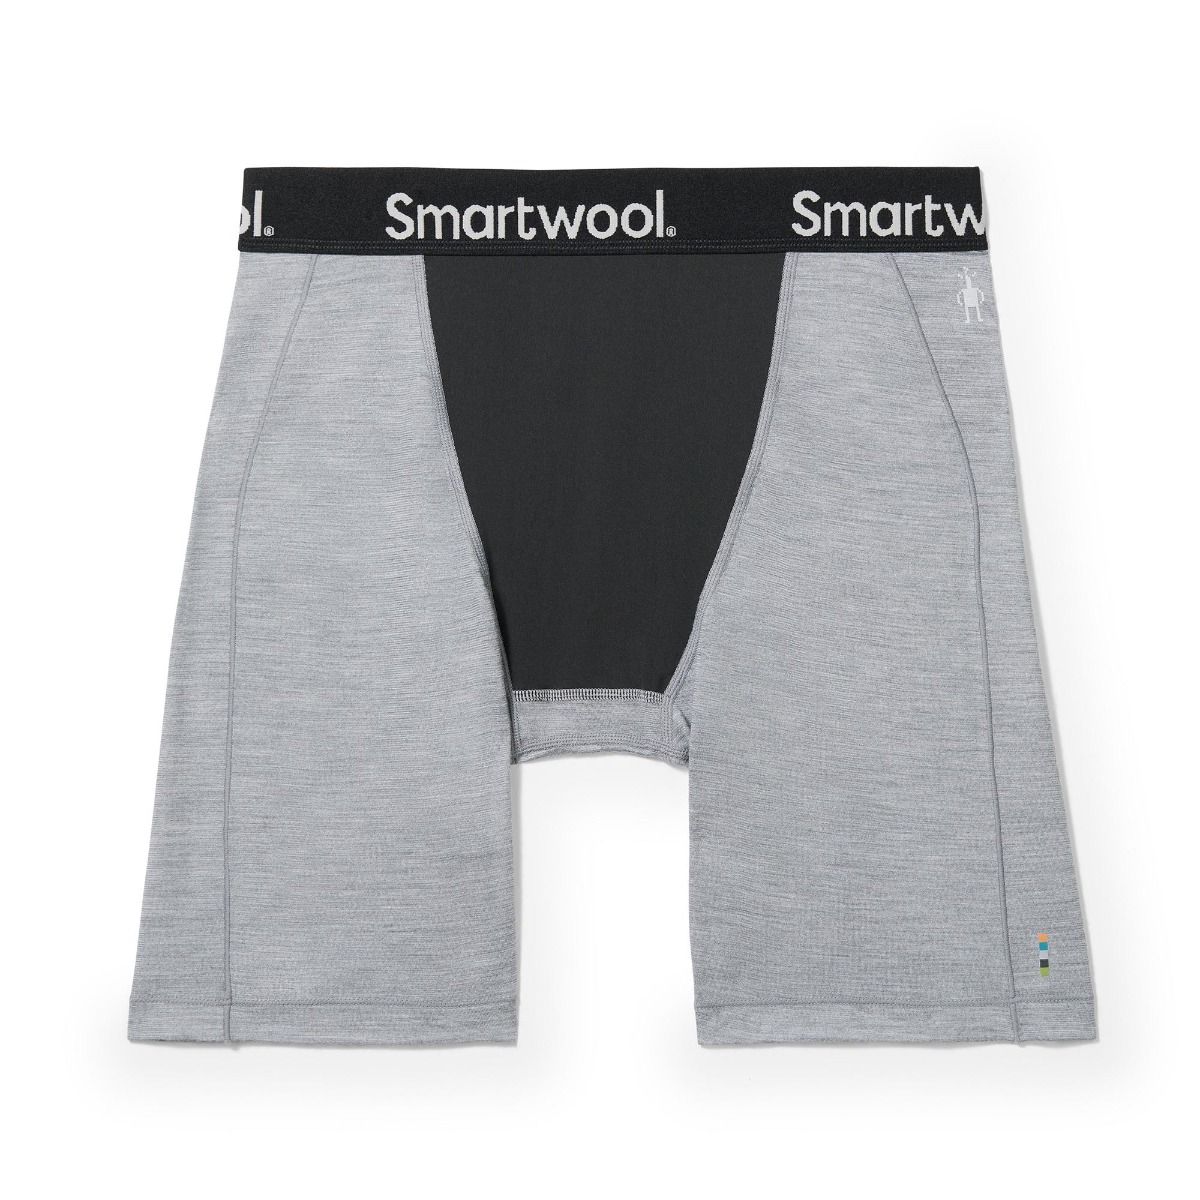 https://smartwool.ca/media/catalog/product/cache/7b241bfd6c26fd1ffc0d56d7717f5c2b/s/w/sw016684545-1-p_2.jpg